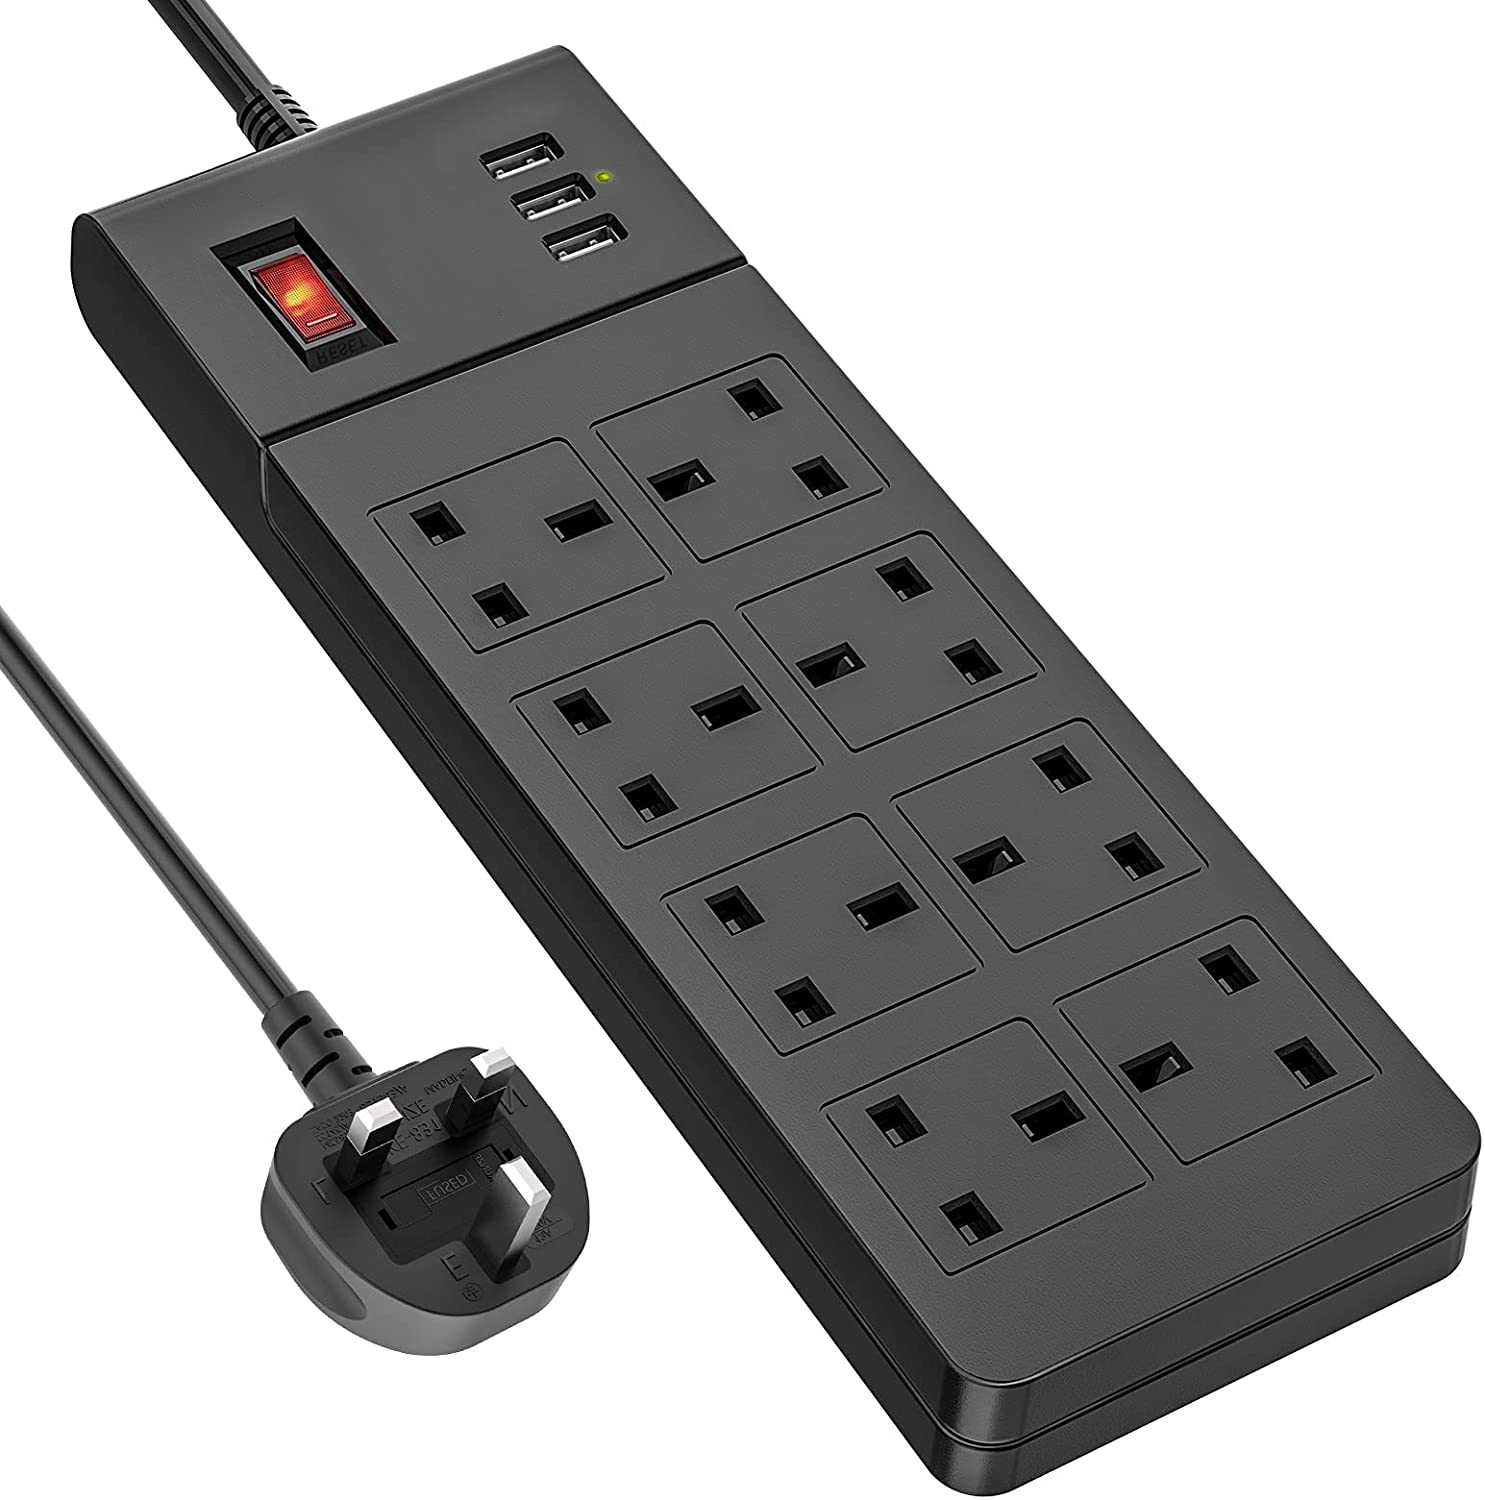 13A/3250W Cube Extension Lead Power Strip with 3 USB Port 3 Way Outlets Extension Lead with USB Slots Power Cube Extension with 1.6M Cable 